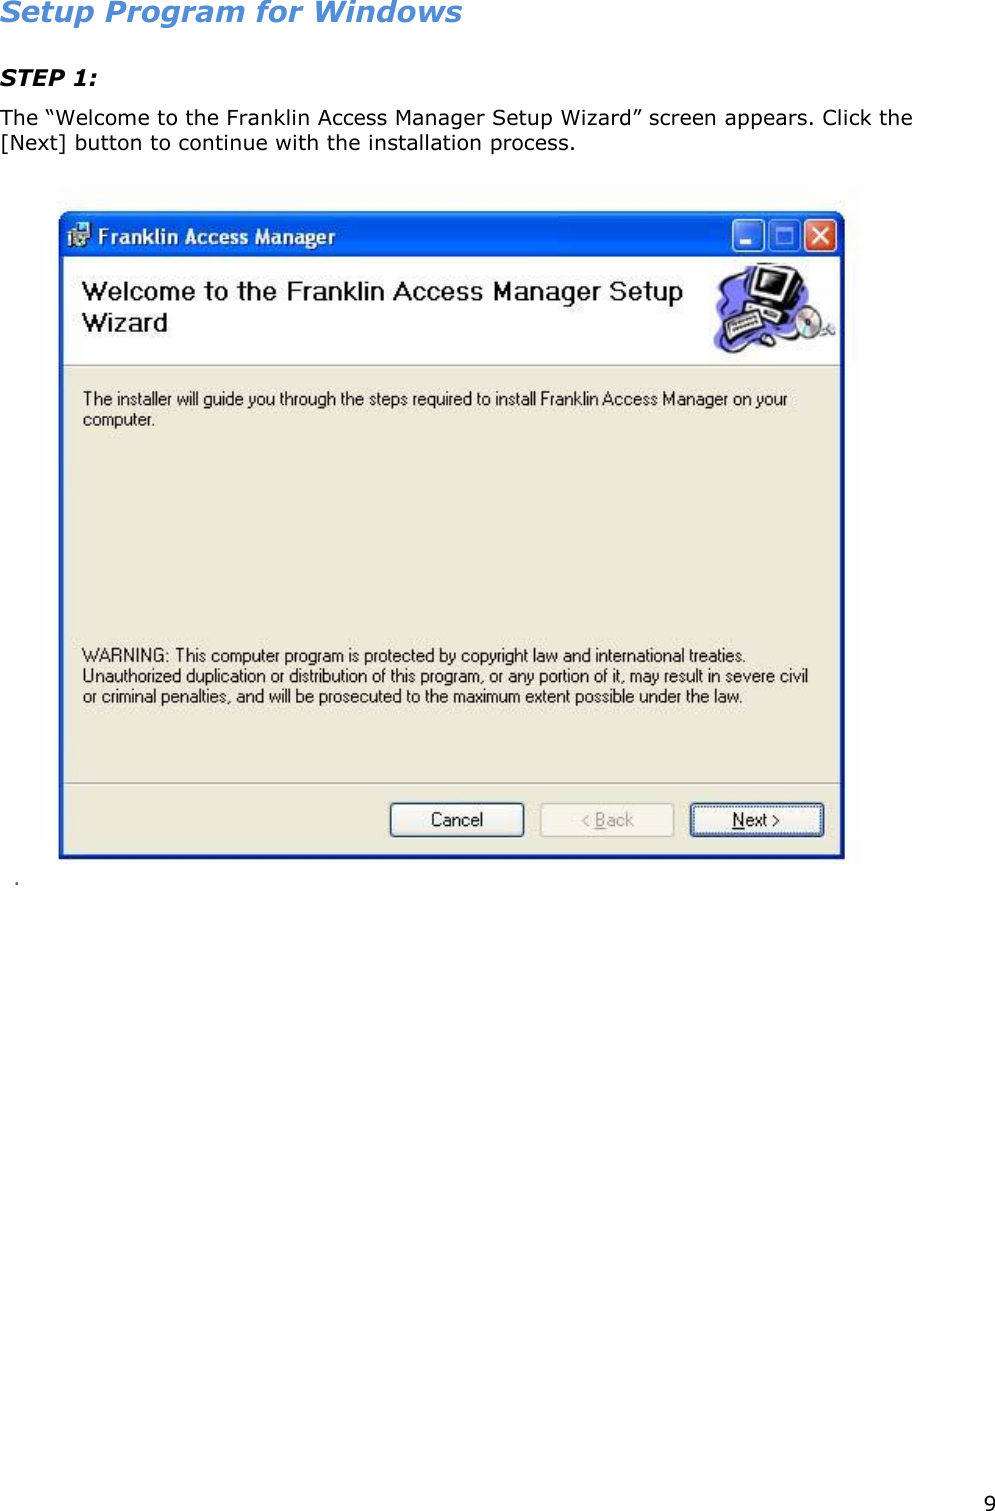 9  Setup Program for Windows   STEP 1:    The “Welcome to the Franklin Access Manager Setup Wizard” screen appears. Click the [Next] button to continue with the installation process.      .                            